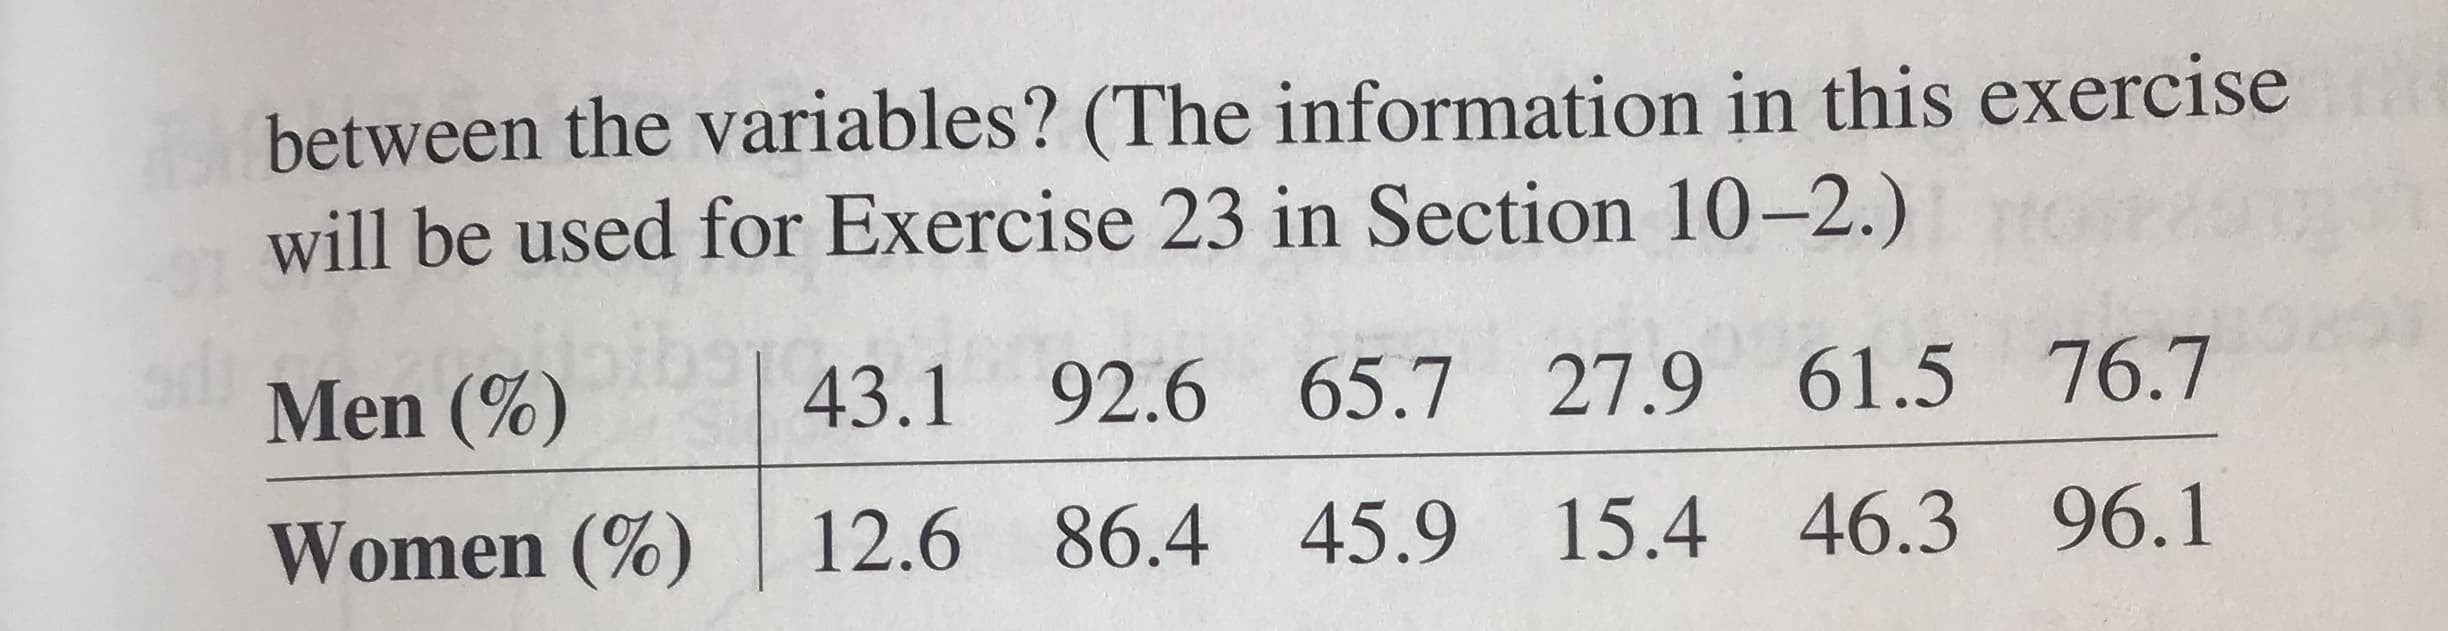 between the variables? (The information in this exercise
will be used for Exercise 23 in Section 10-2.)
Men (%)
43.1
92.6 65.7 27.9 61.5 76.7
Women (%)
12.6 86.4 45.9
15.4 46.3 96.1
